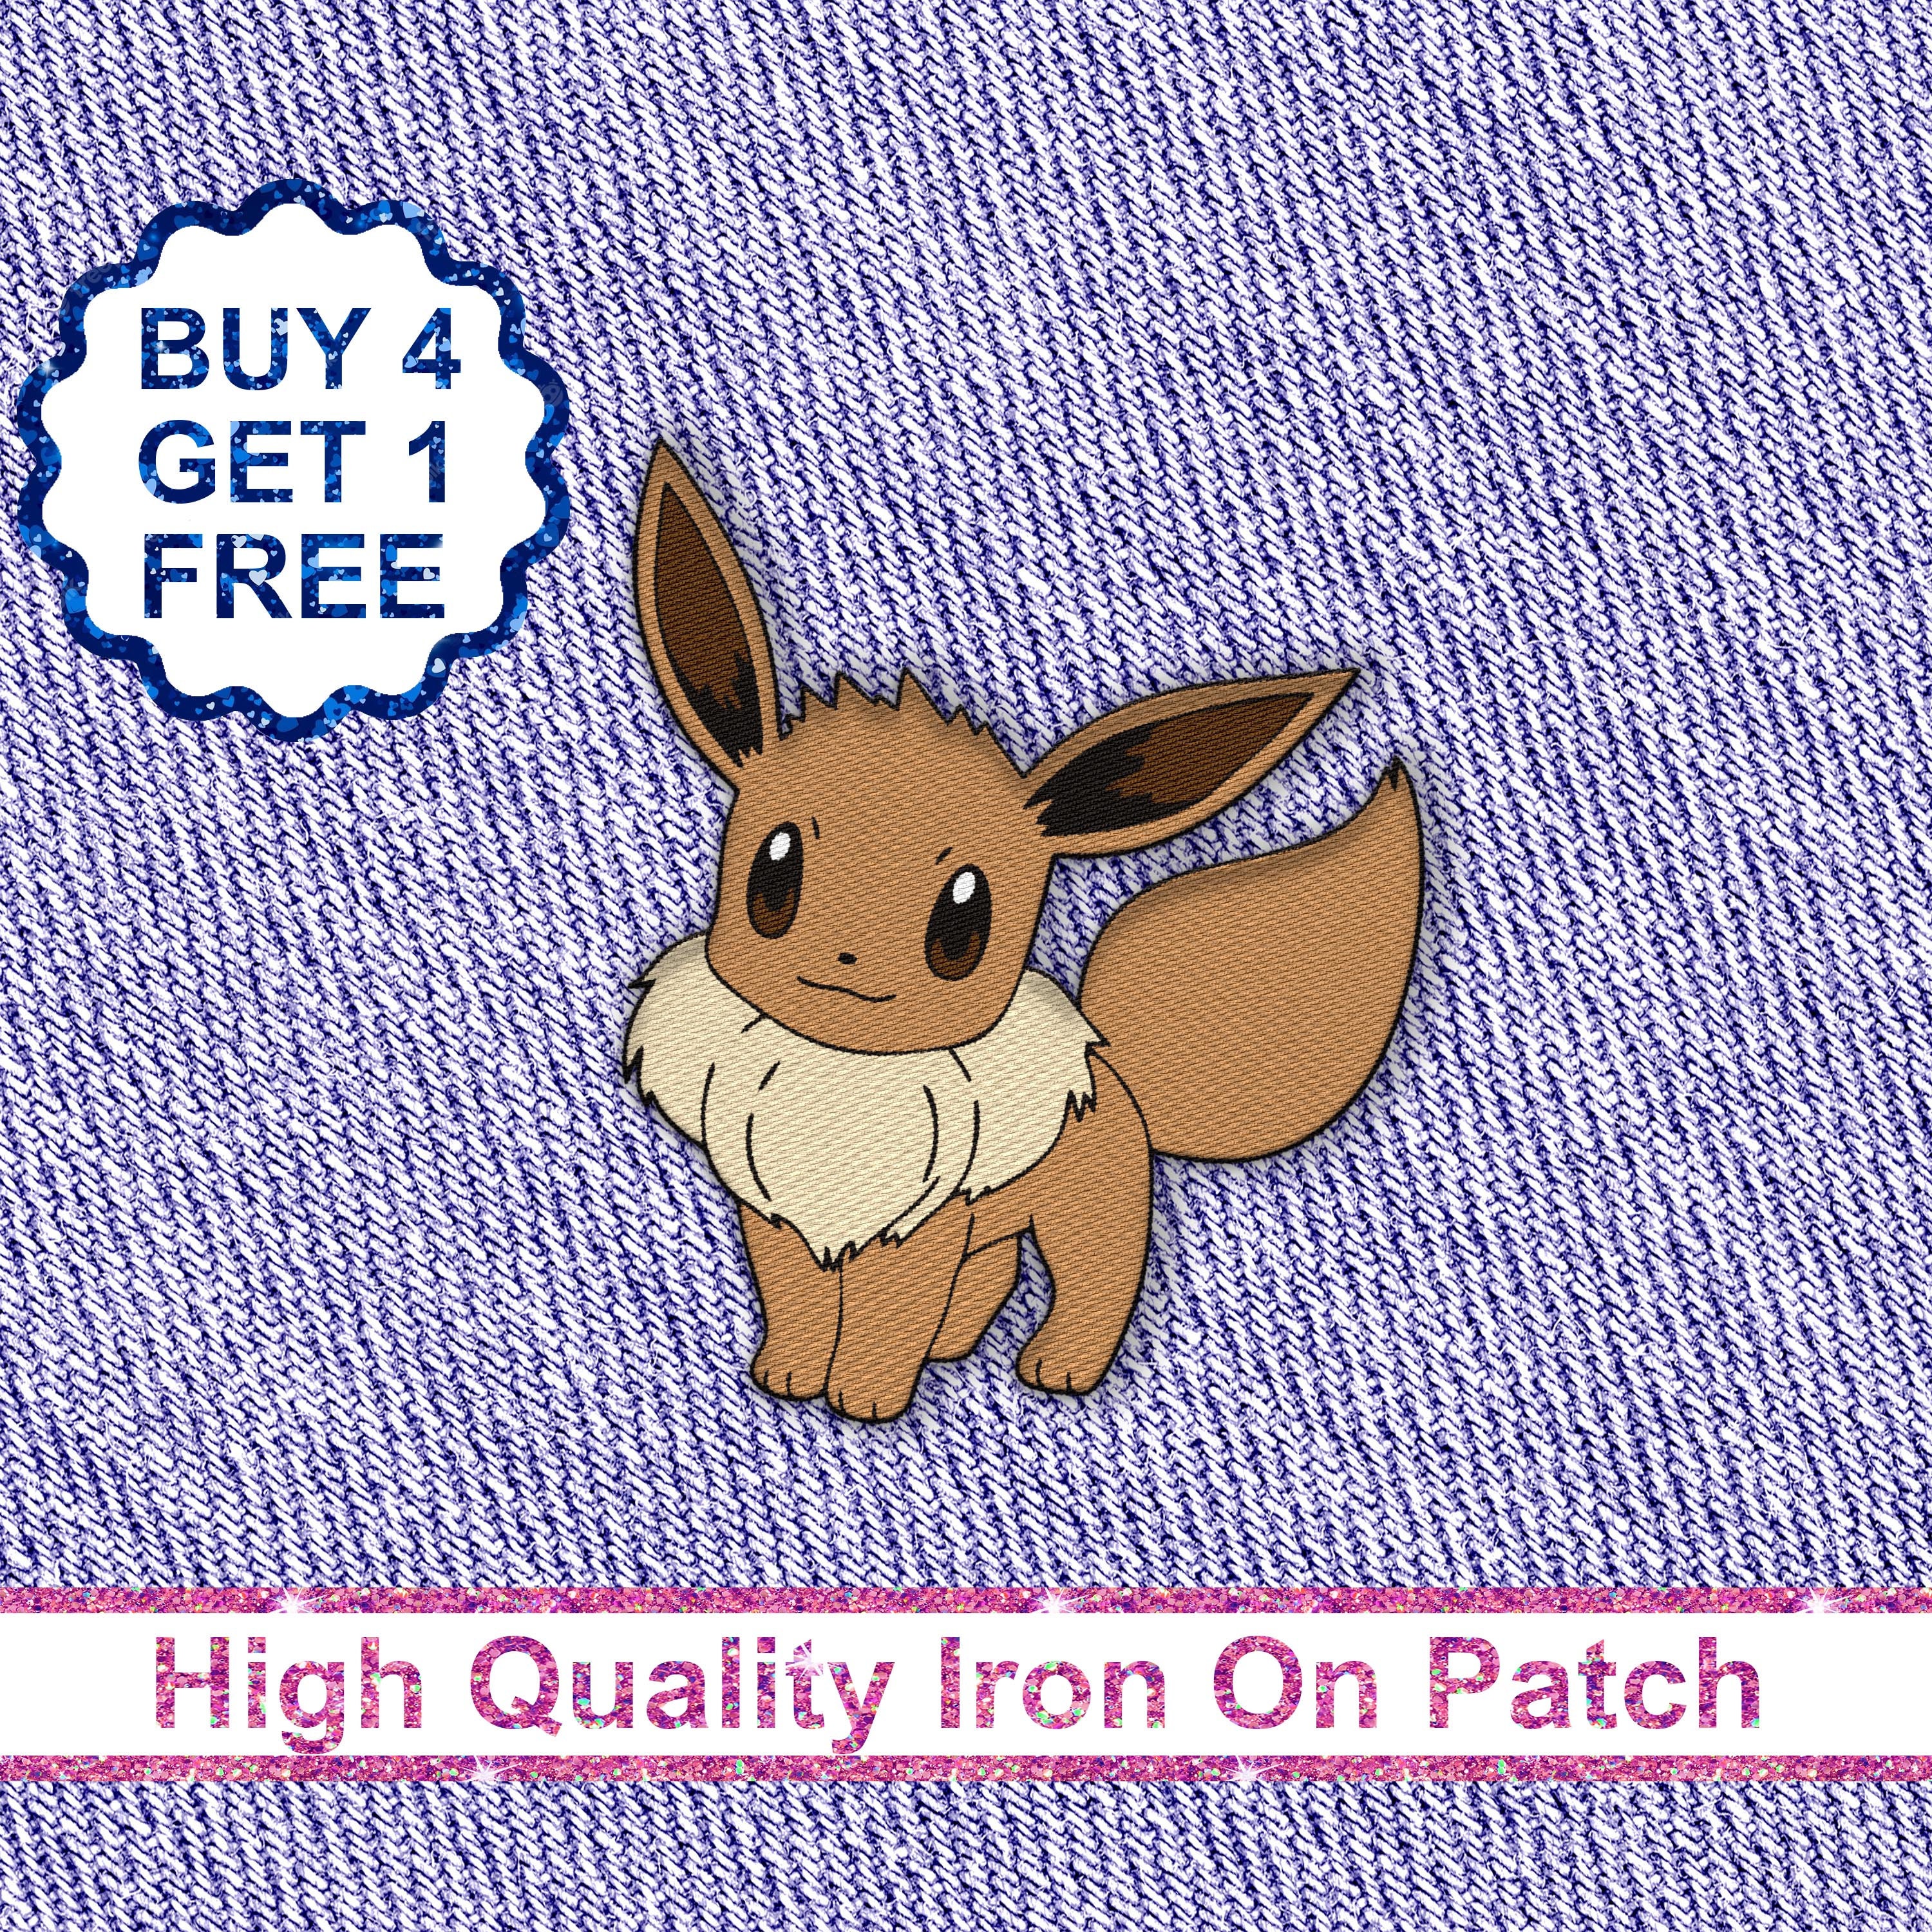 Pokemon Iron on Patches Patch Denim Embroidery Eevee, Charizard,  Charmander, Pikachu, Squirtle, Bulbasaur, Meowth, Pokeball 